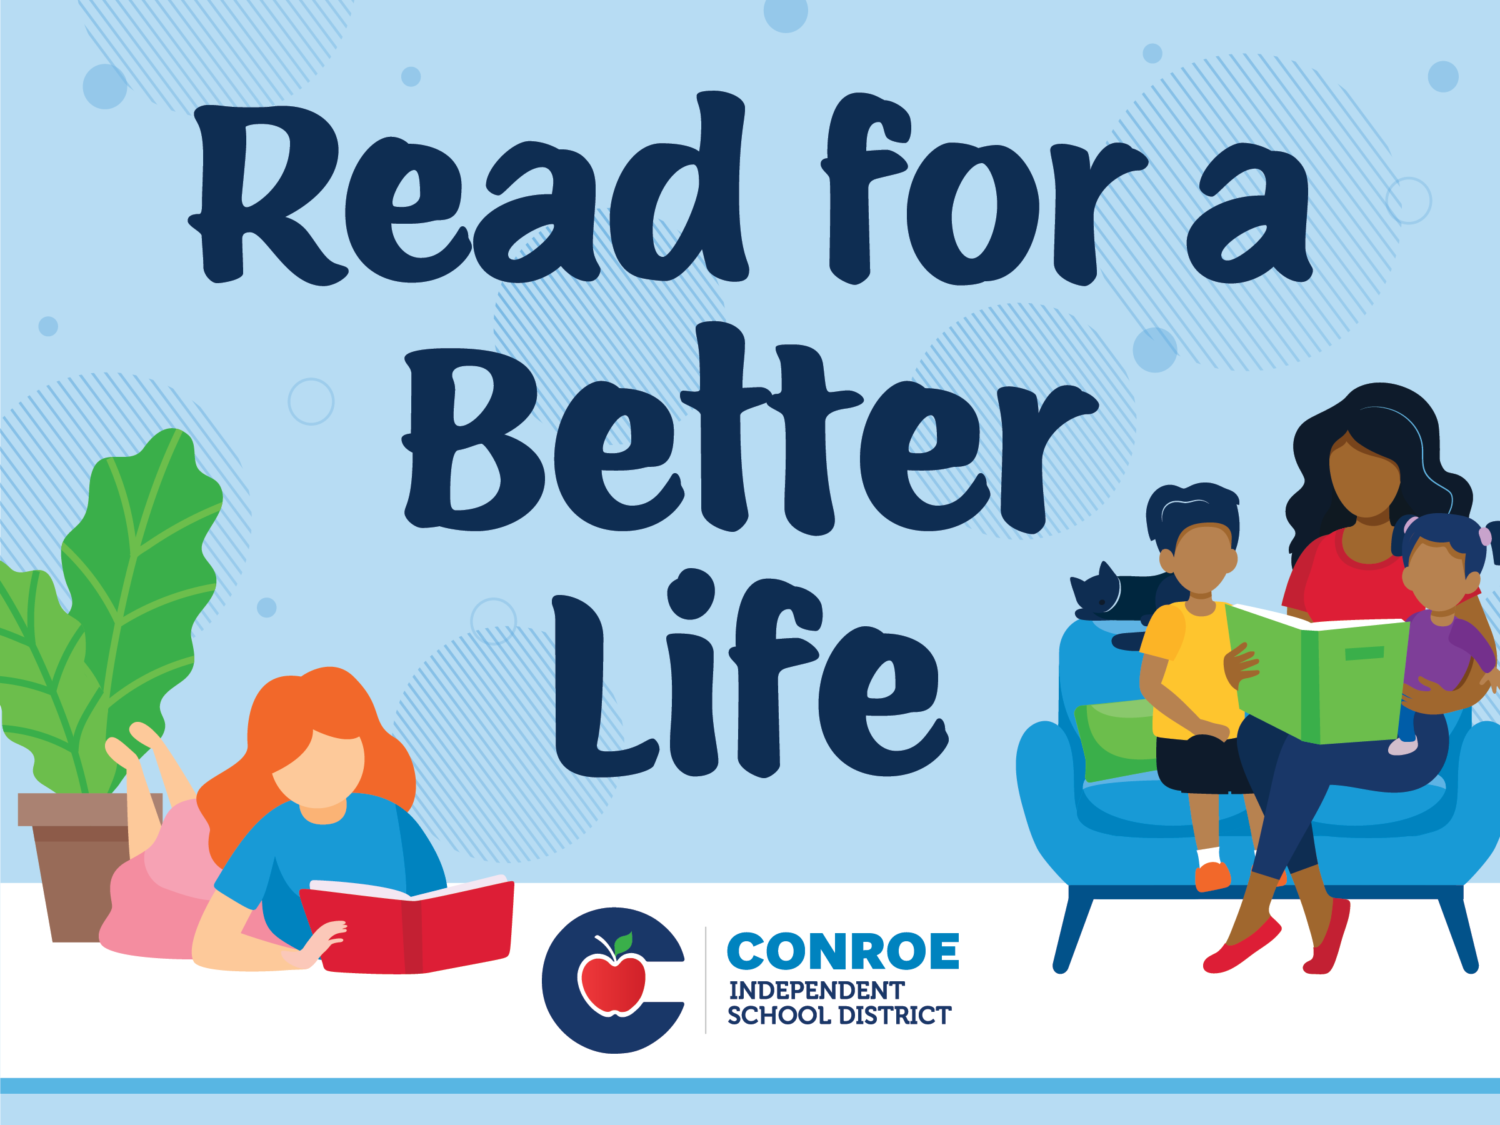 Read for a Better Life graphic.